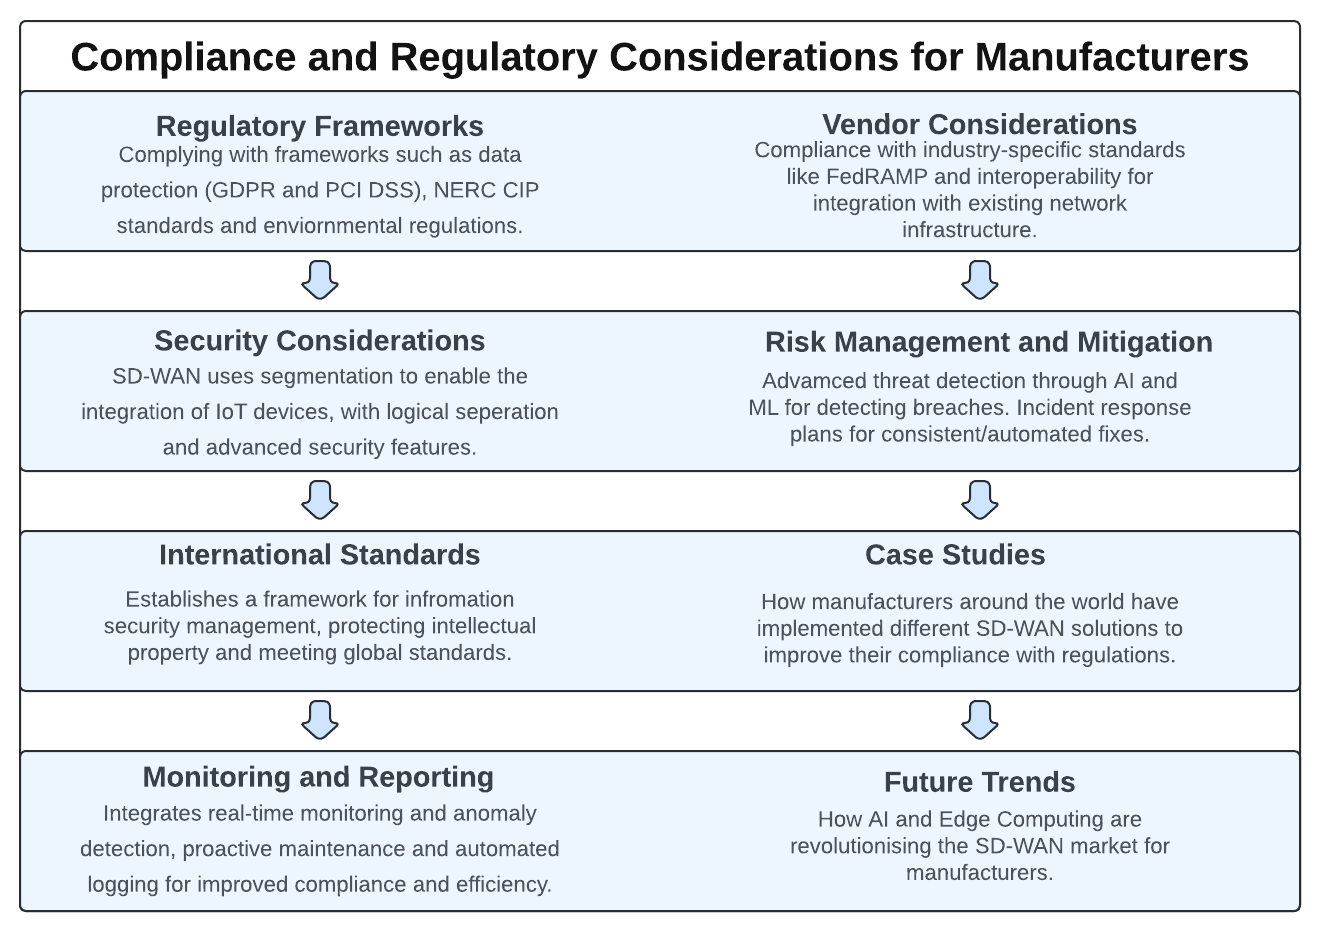 Compliance and Regulatory Considerations for SD-WAN in Manufacturing